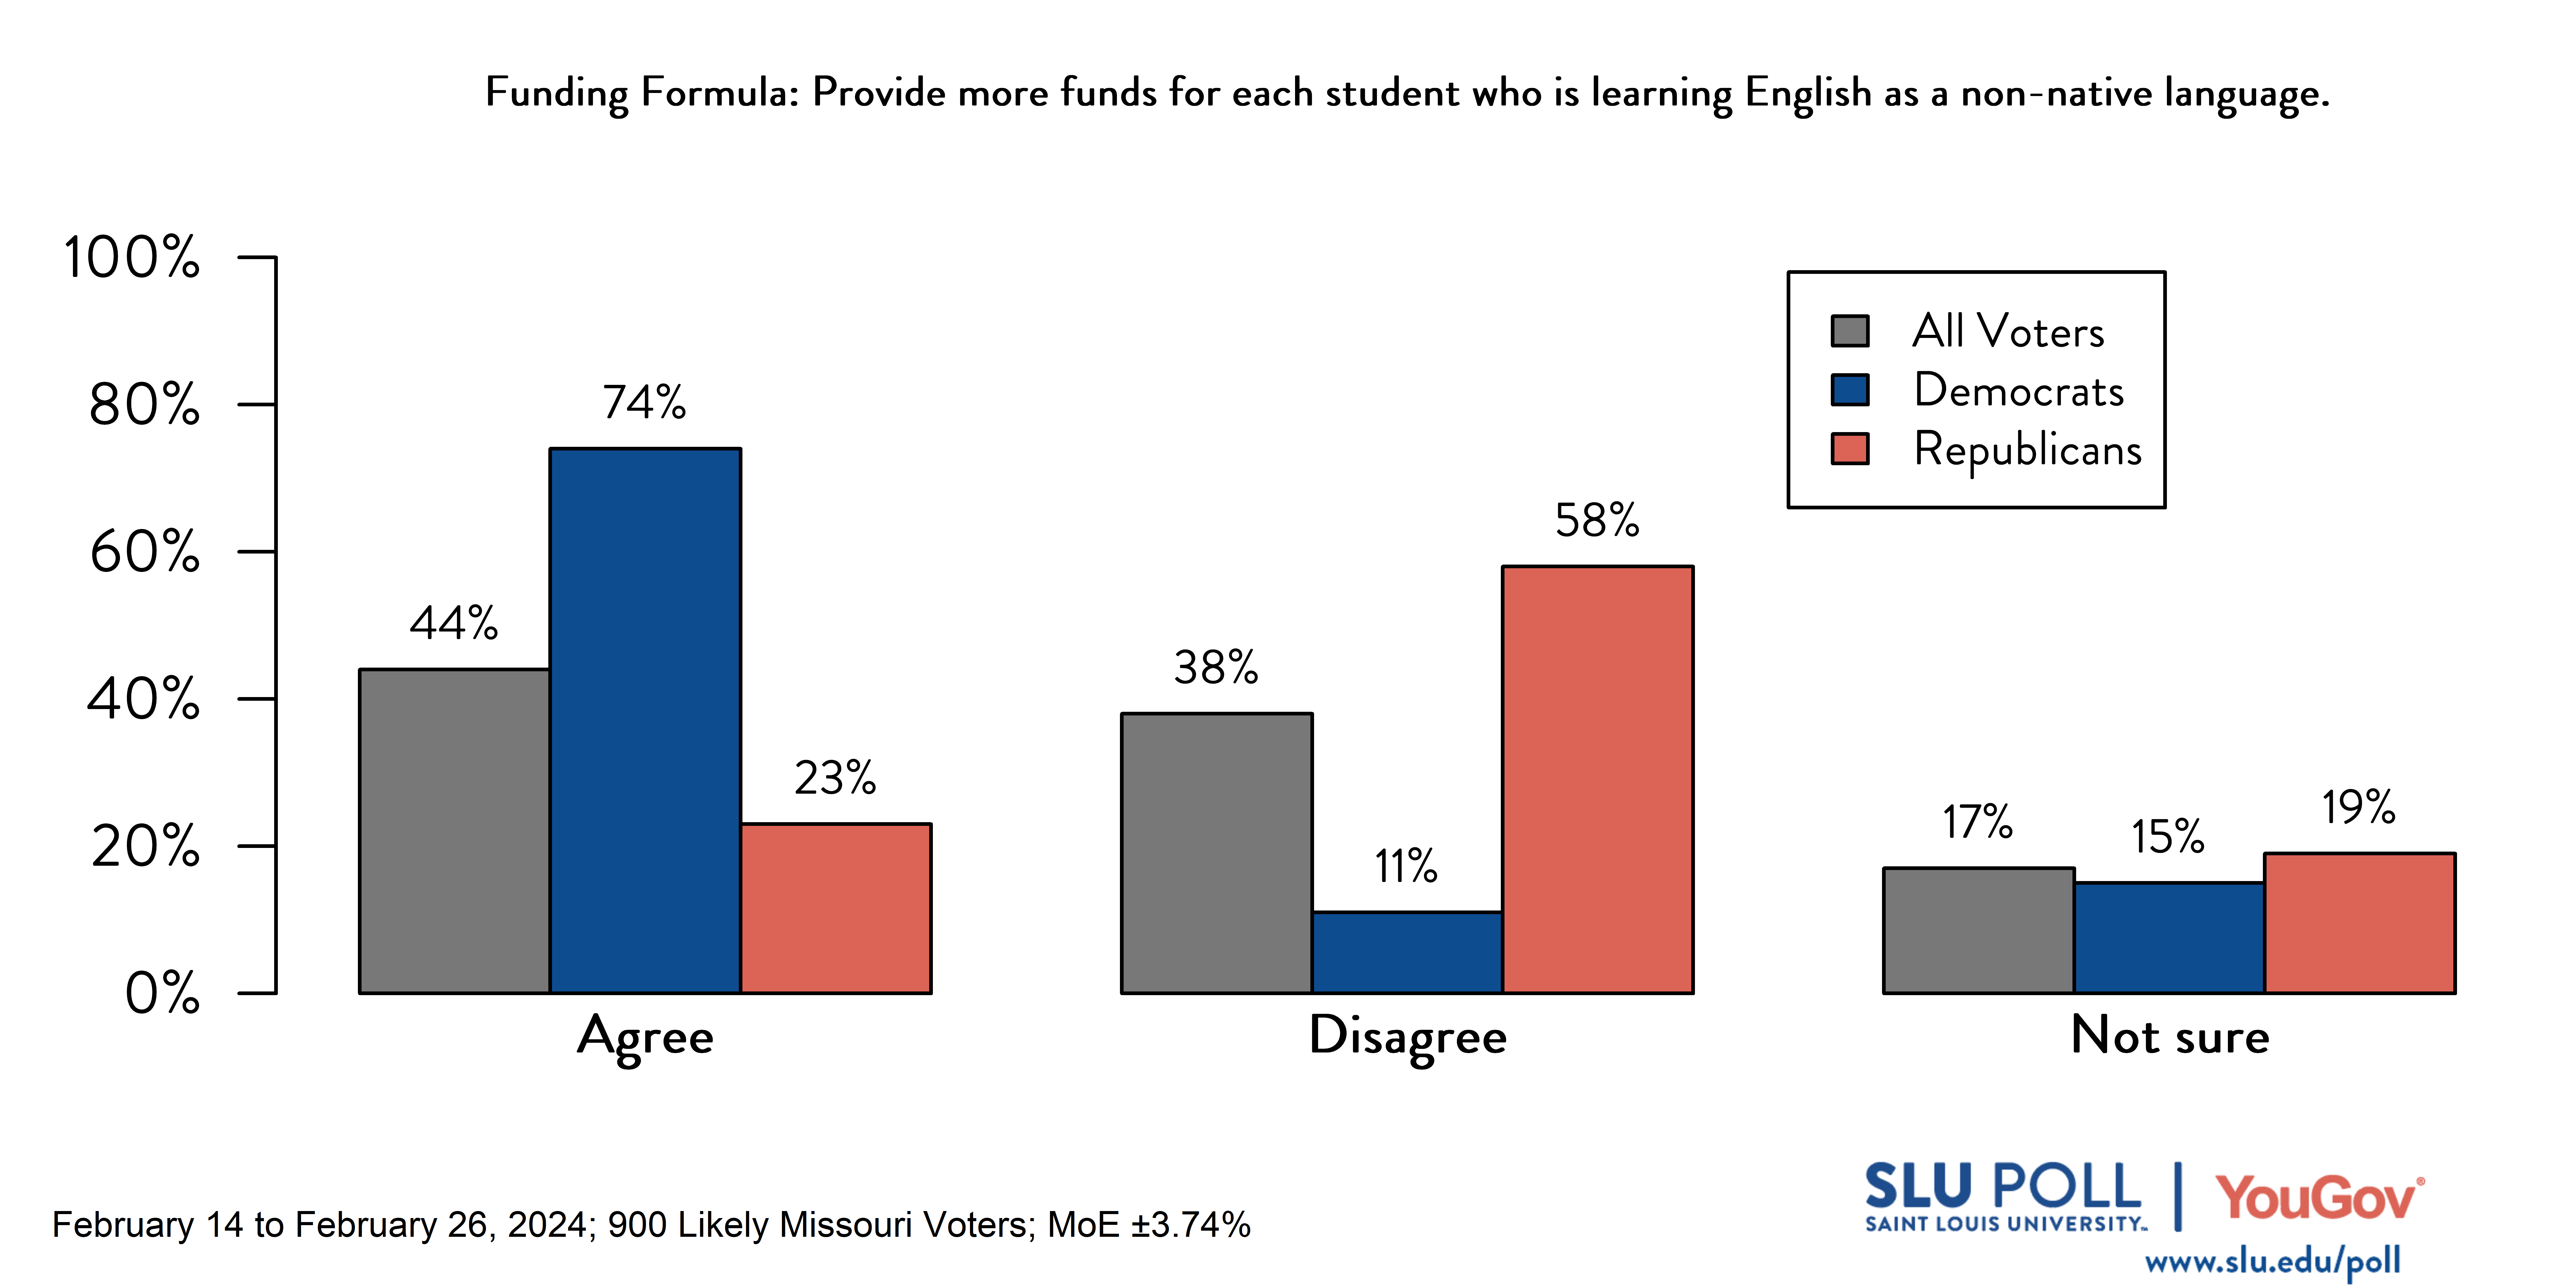 Likely voters' responses to 'Do you agree or disagree that this funding formula should do the following…Provide more funds for each student who is learning English as a non-native language?': 44% Agree, 38% Disagree, and 17% Not Sure. Democratic voters' responses: ' 74% Agree, 11% Disagree, and 15% Not Sure. Republican voters' responses:  23% Agree, 58% Disagree, and 19% Not Sure.